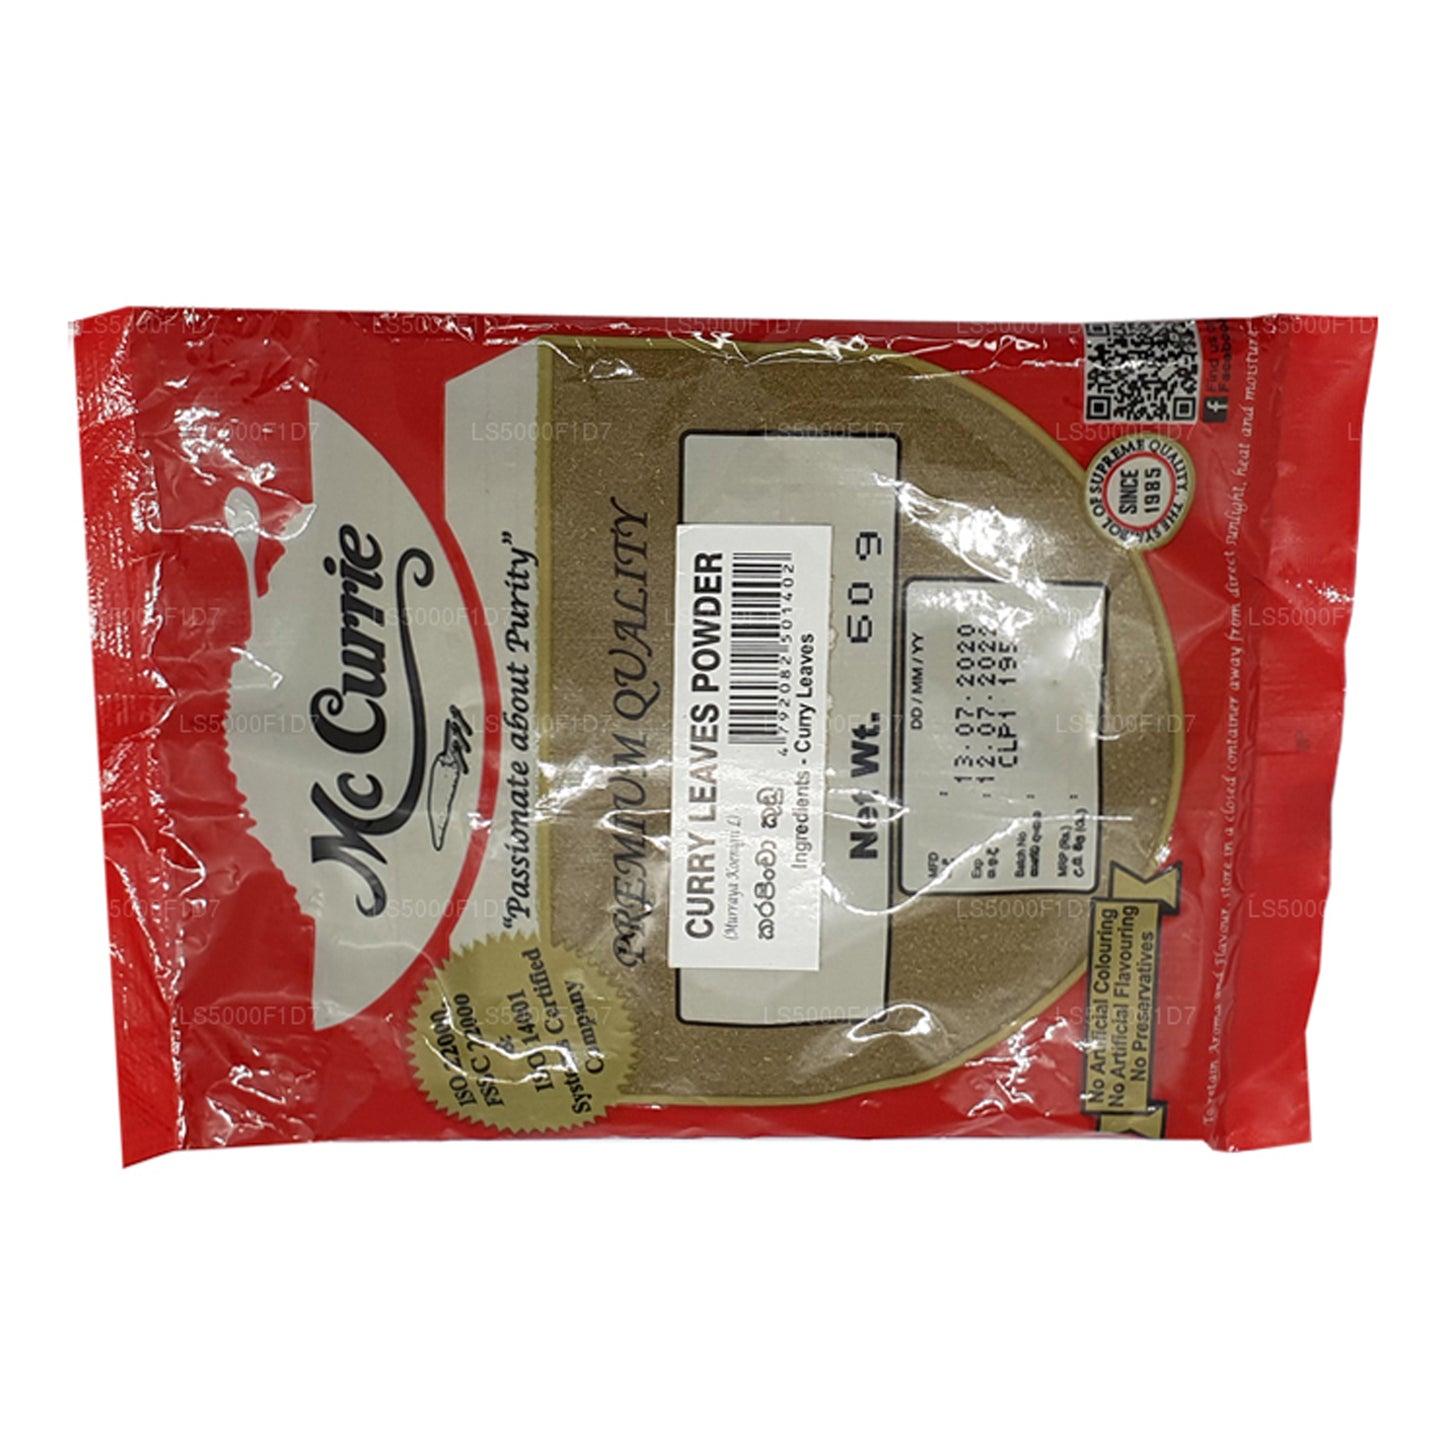 Mc Currie Curry Leaves Powder (50g)